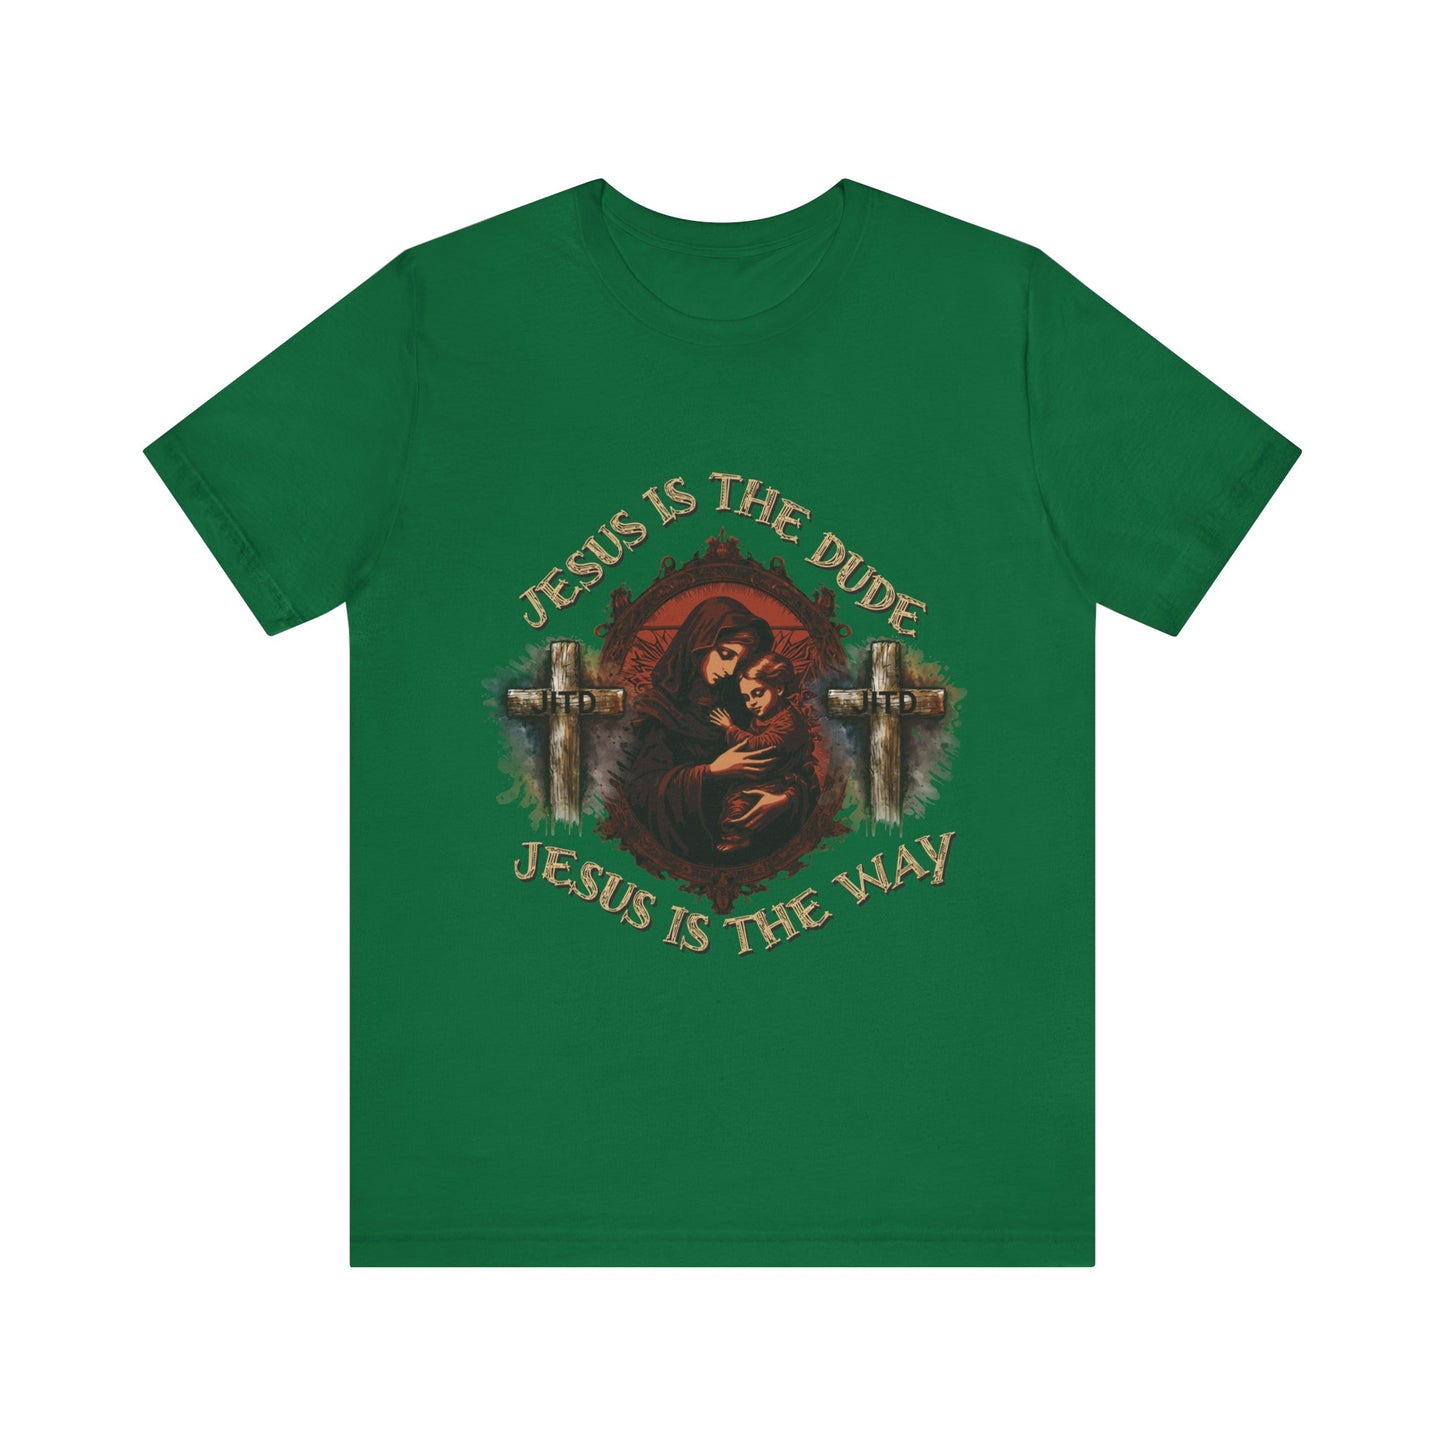 JESUS IS THE DUDE "AND THE WAY" TEE